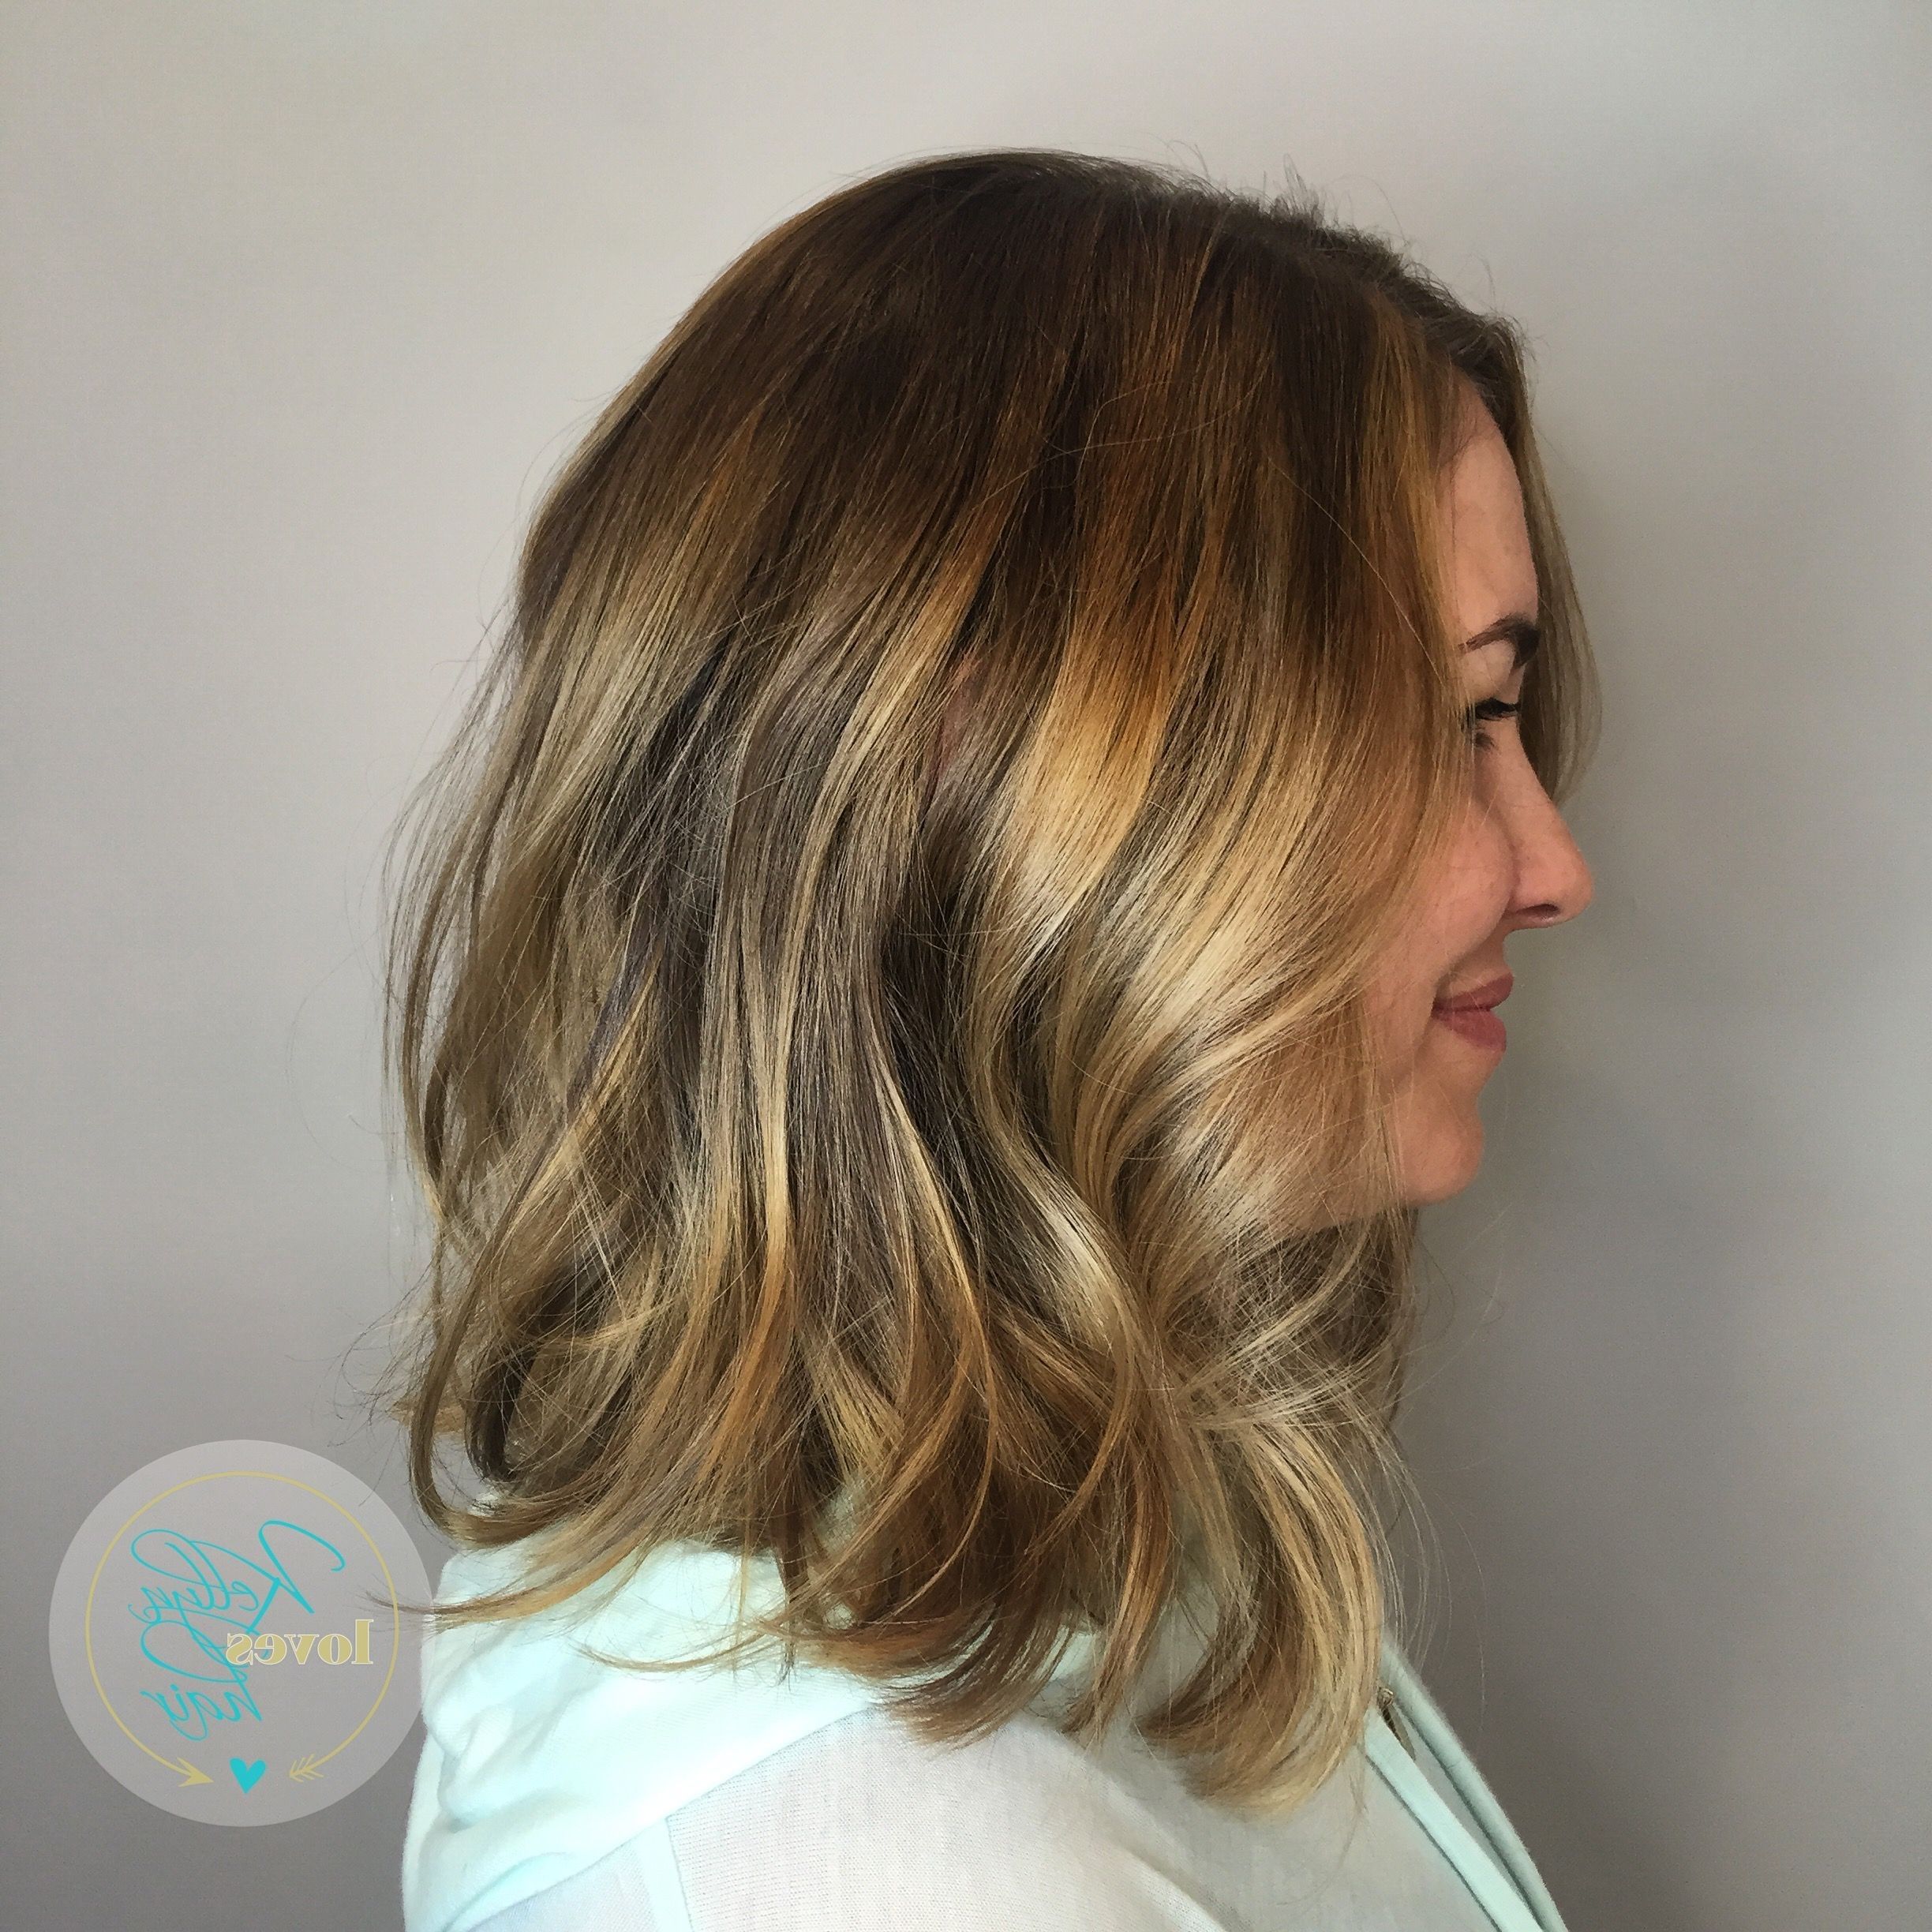 Natural Dark Blonde With Painted Highlights And Lowlights  Long Bob Inside Trendy Long Bob Blonde Hairstyles With Lowlights (View 6 of 20)